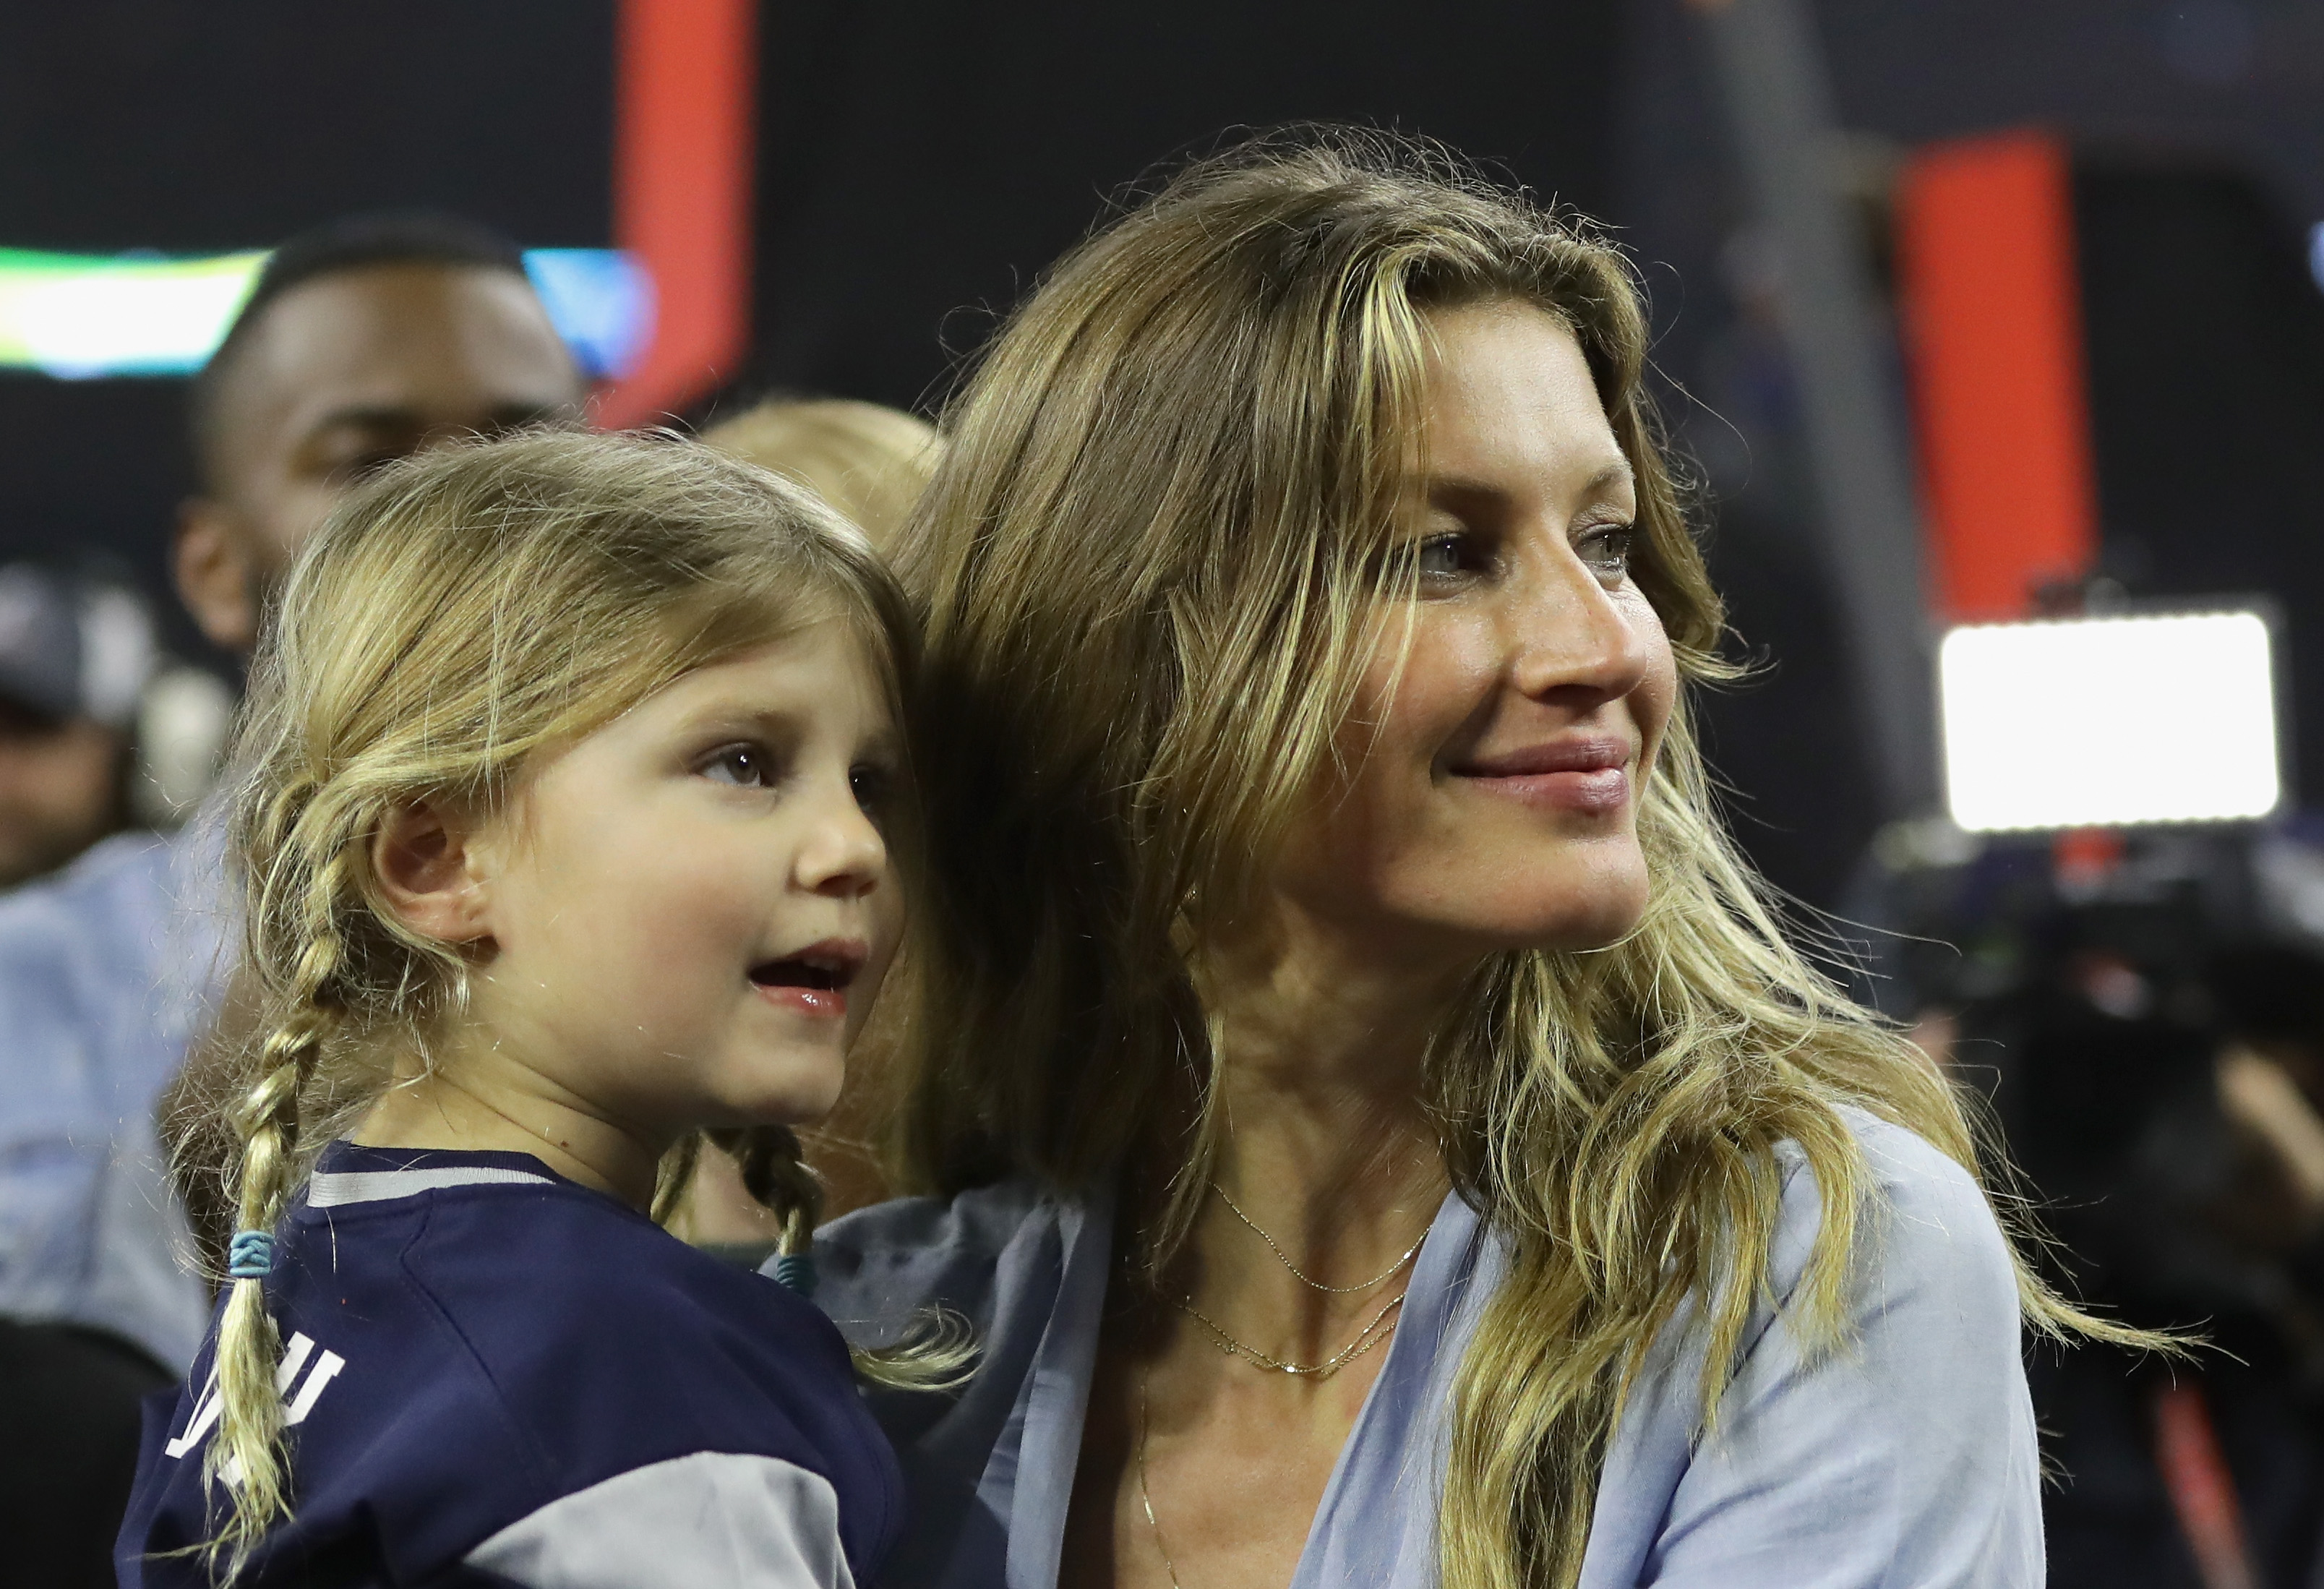 HOUSTON, TX - FEBRUARY 05:  Gisele Bundchen celebrates with daughter Vivian Brady after the New England Patriots defeated the Atlanta Falcons during Super Bowl 51 at NRG Stadium on February 5, 2017 in Houston, Texas.  The Patriots defeated the Falcons 34-28.  (Photo by Ronald Martinez/Getty Images) (Ronald Martinez—Getty Images)